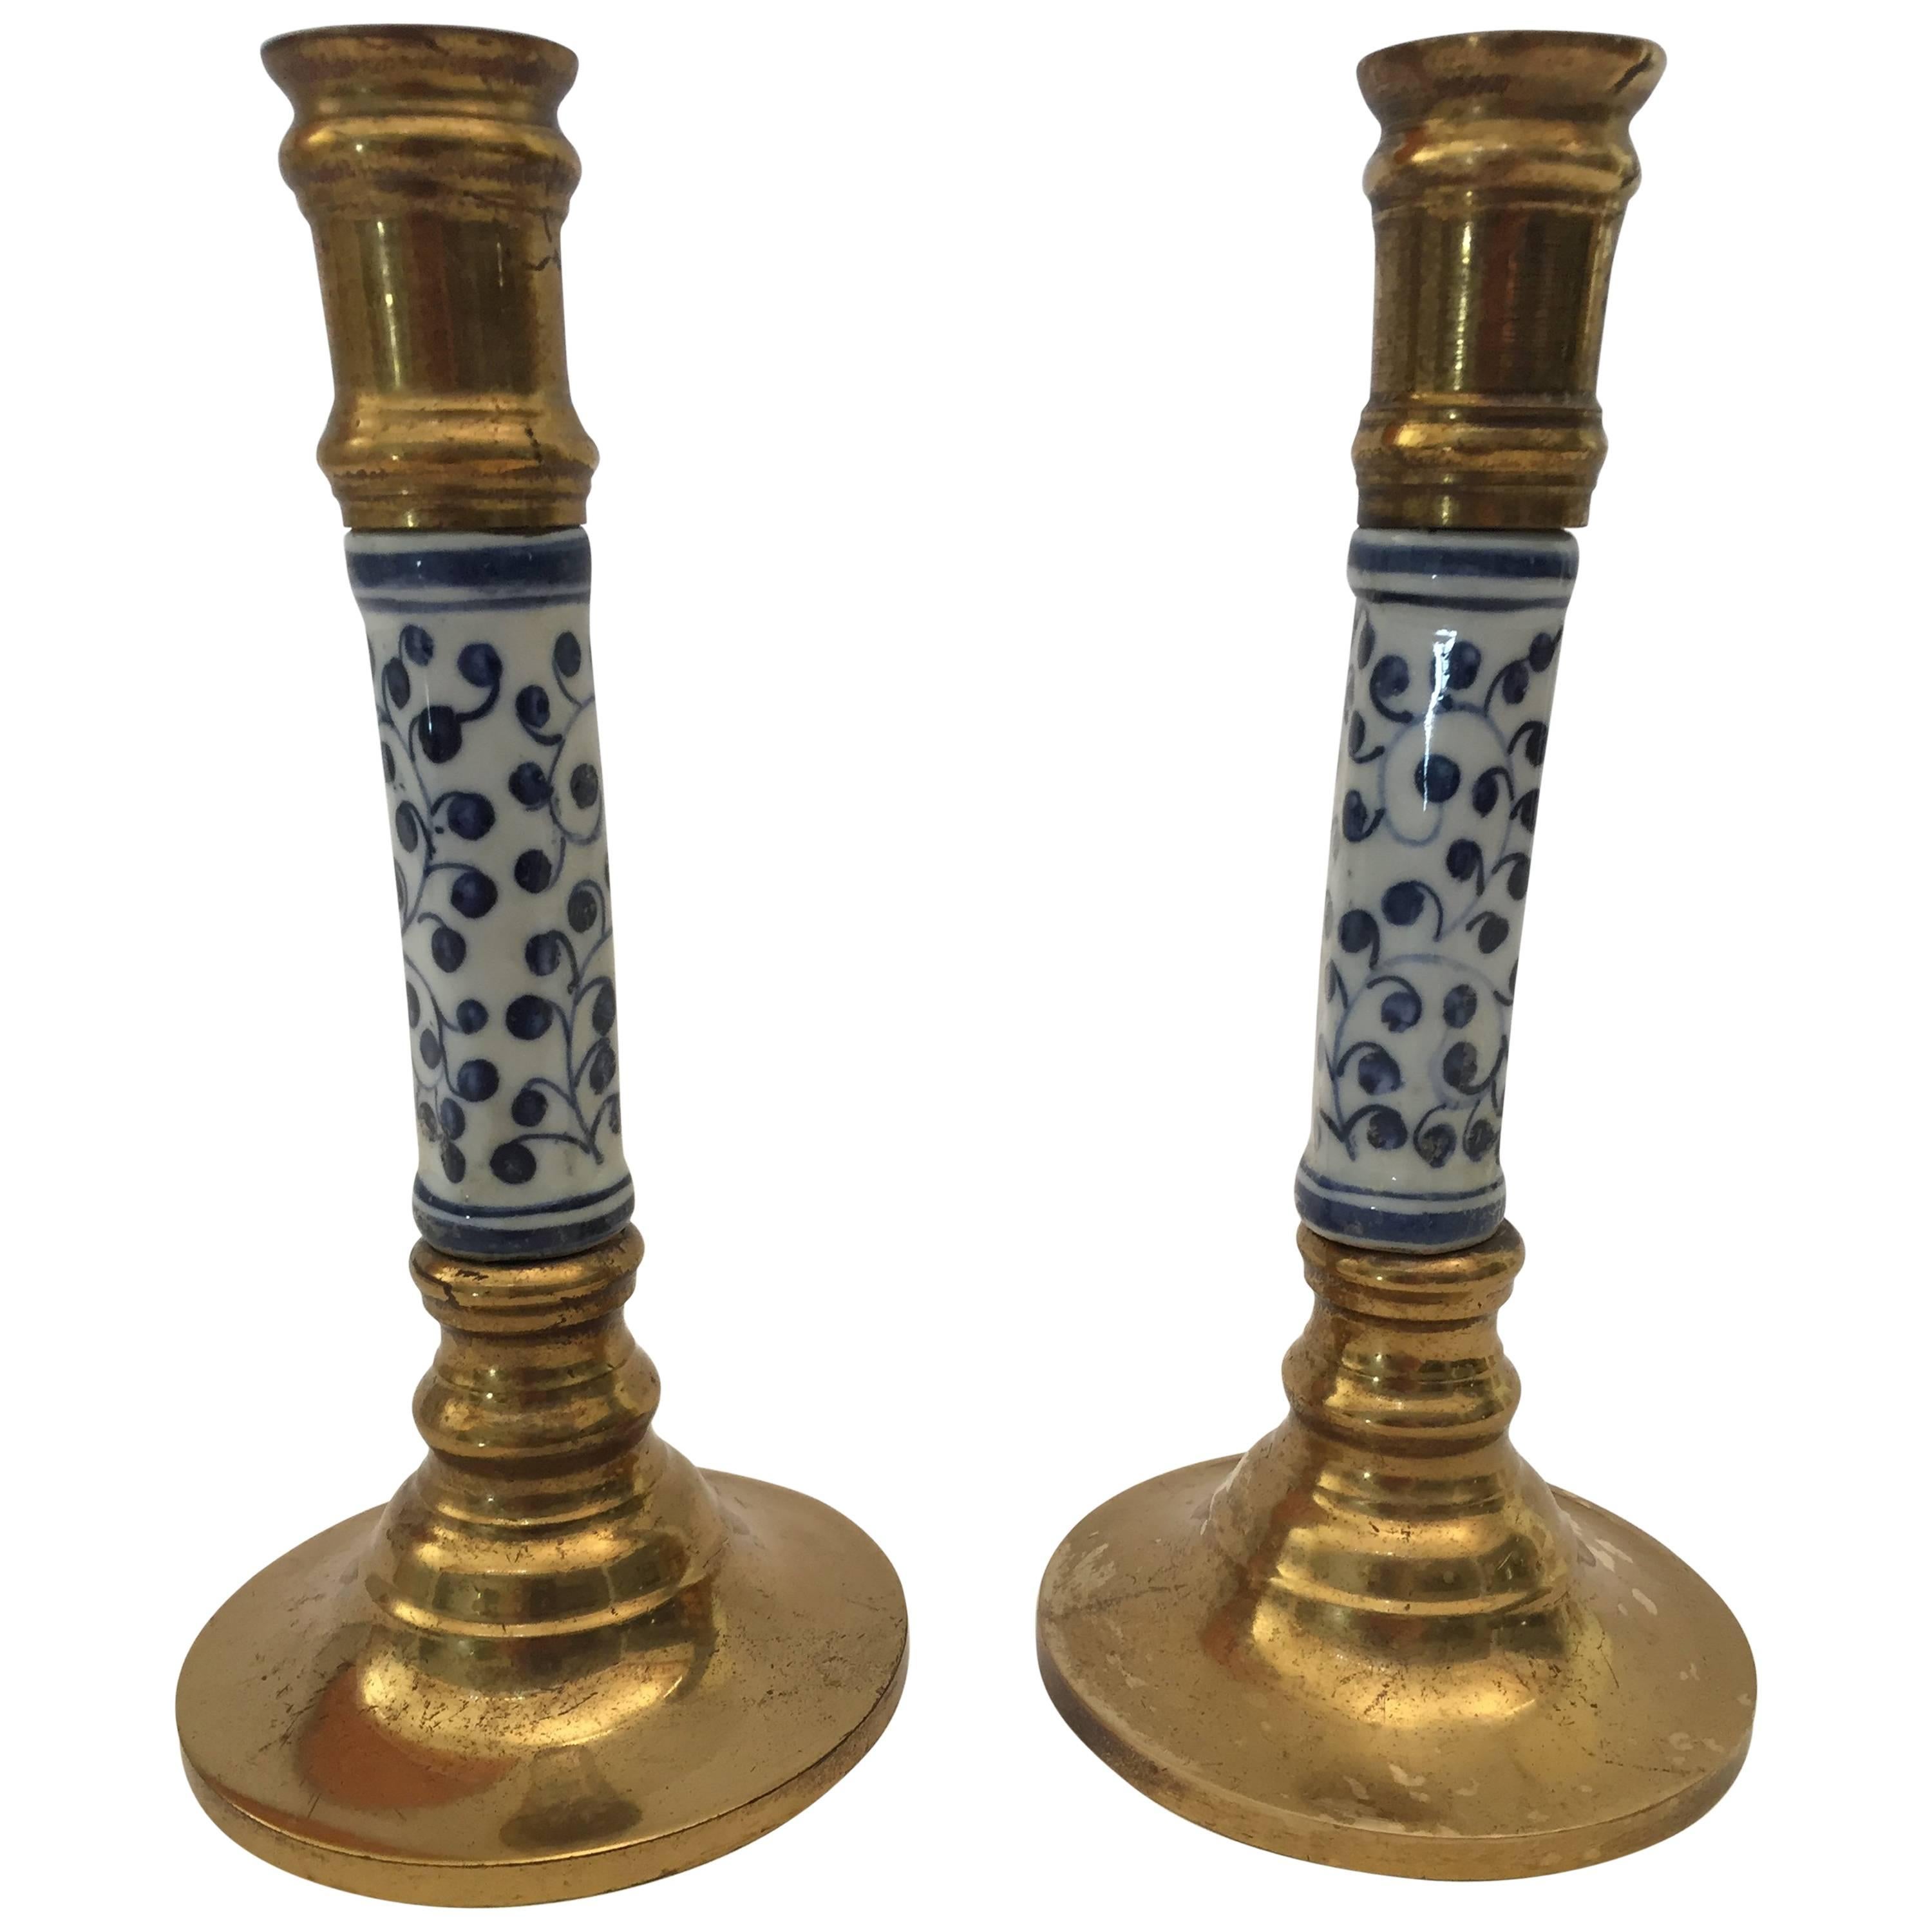 Pair of Victorian Brass Candlesticks with Ceramic